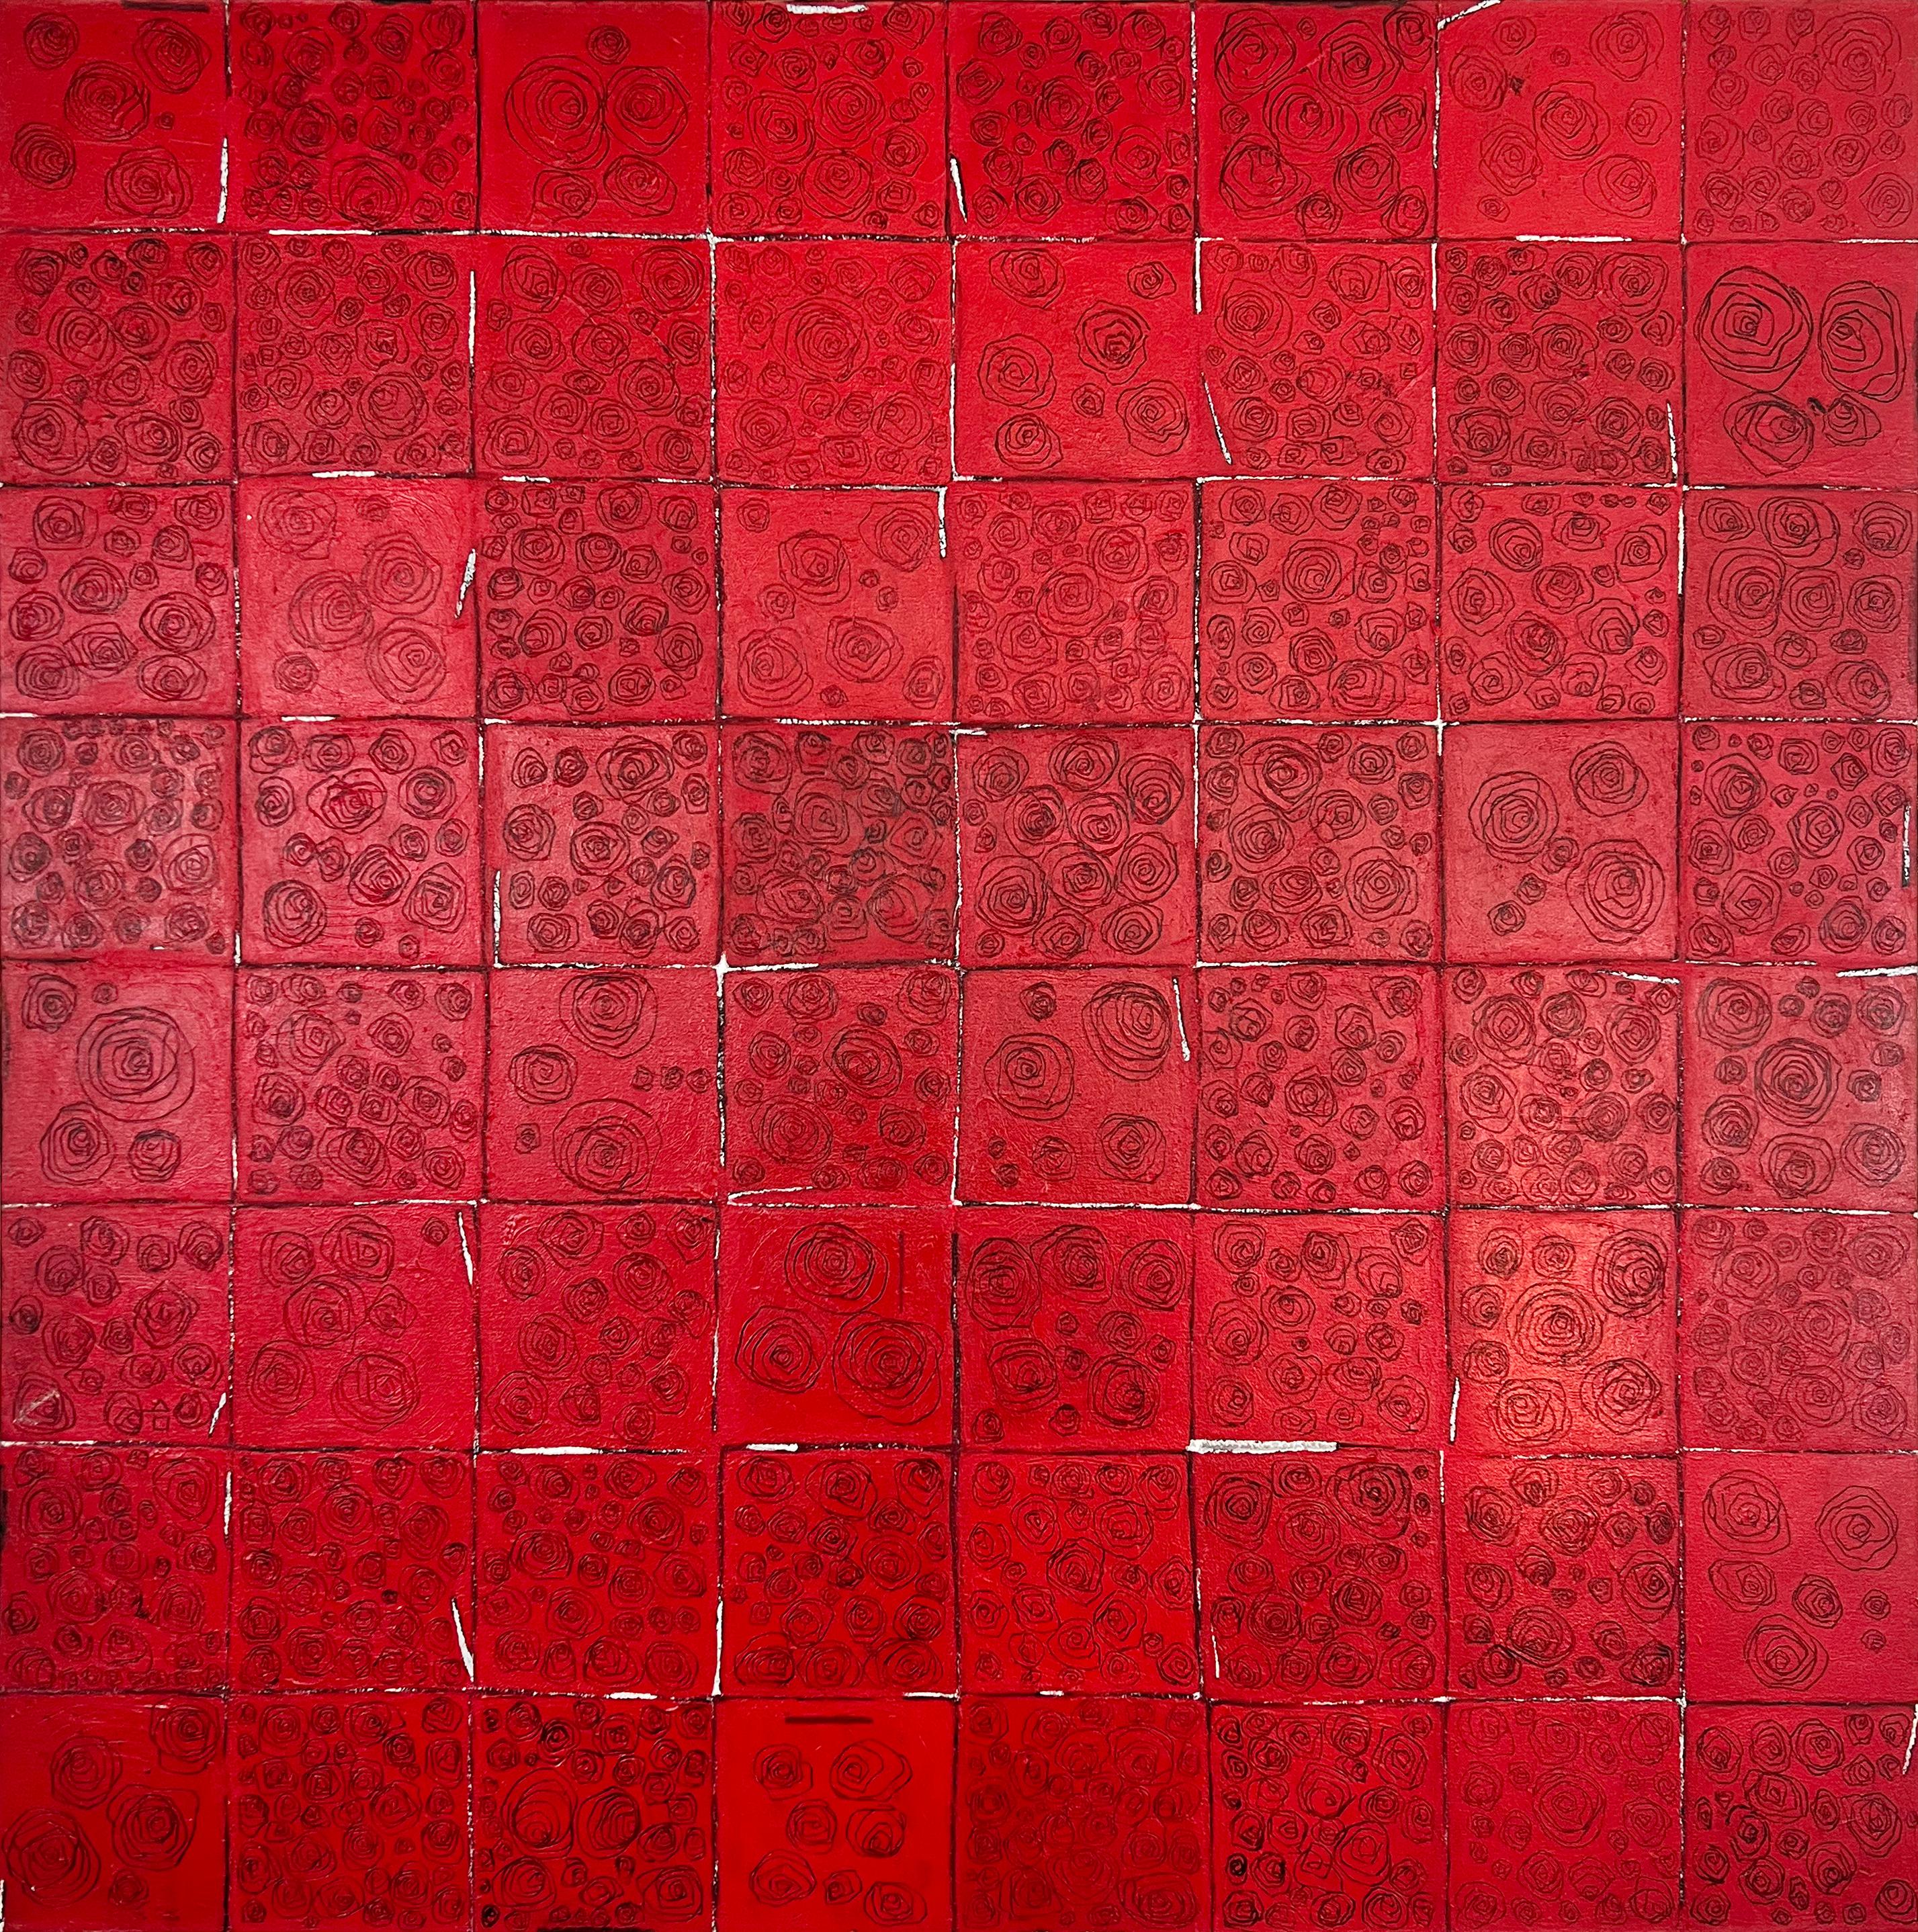 This large, red abstract painting by Sofie Swann is made with acrylic paint on canvas. It features a square pattern composition in a deep red color, with abstracted, thin black line drawings of roses within each square. The square outlines are